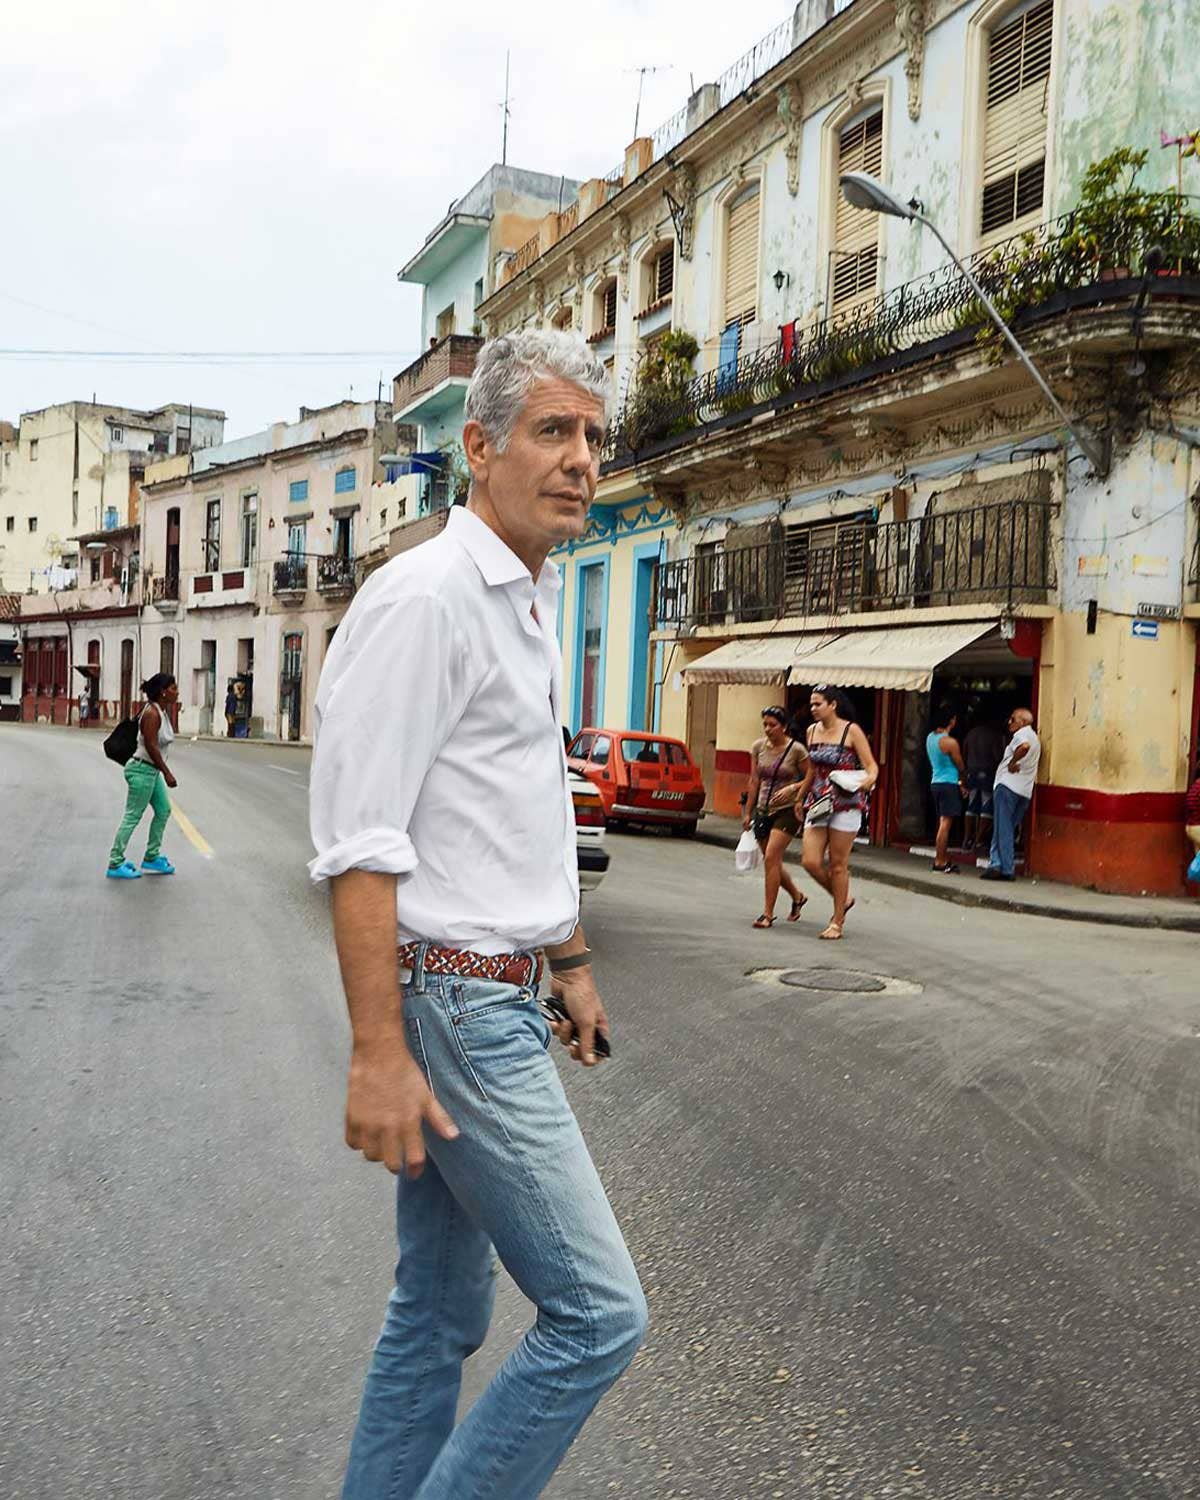 Anthony Bourdain Weighs in on Sexual Harassment in Restaurants Amidst Allegations Against Chef John Besh